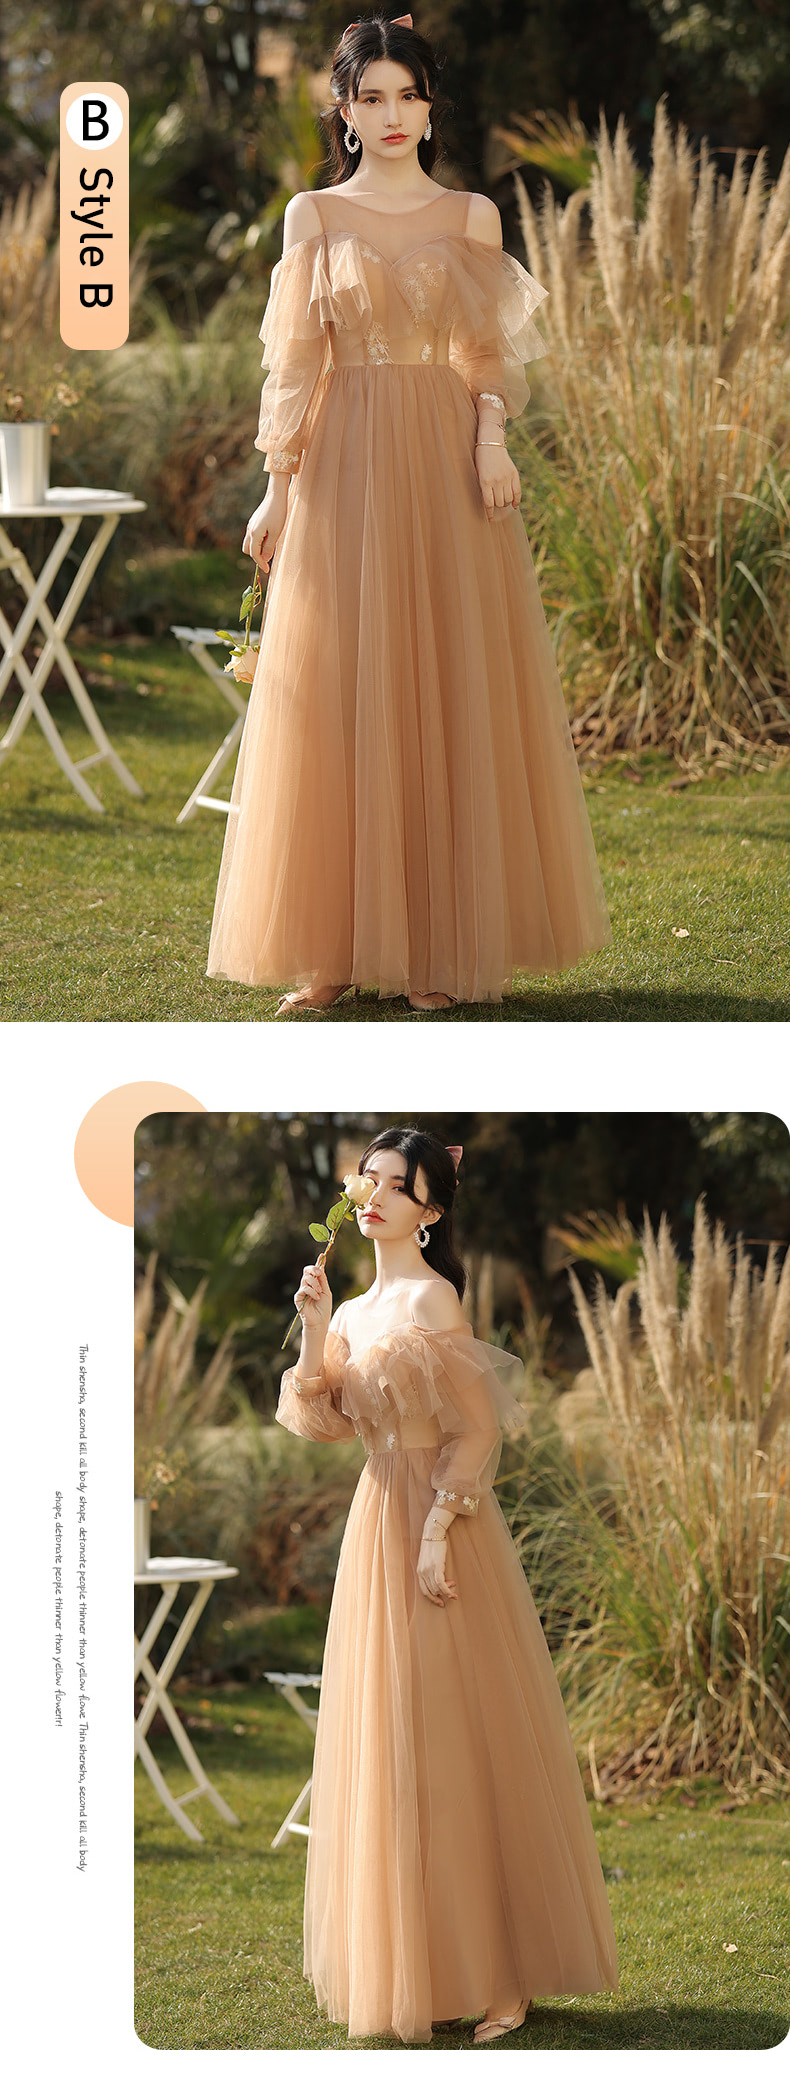 Fairy-Champagne-Bridesmaid-Long-Dress-Sweet-Evening-Formal-Gown16.jpg